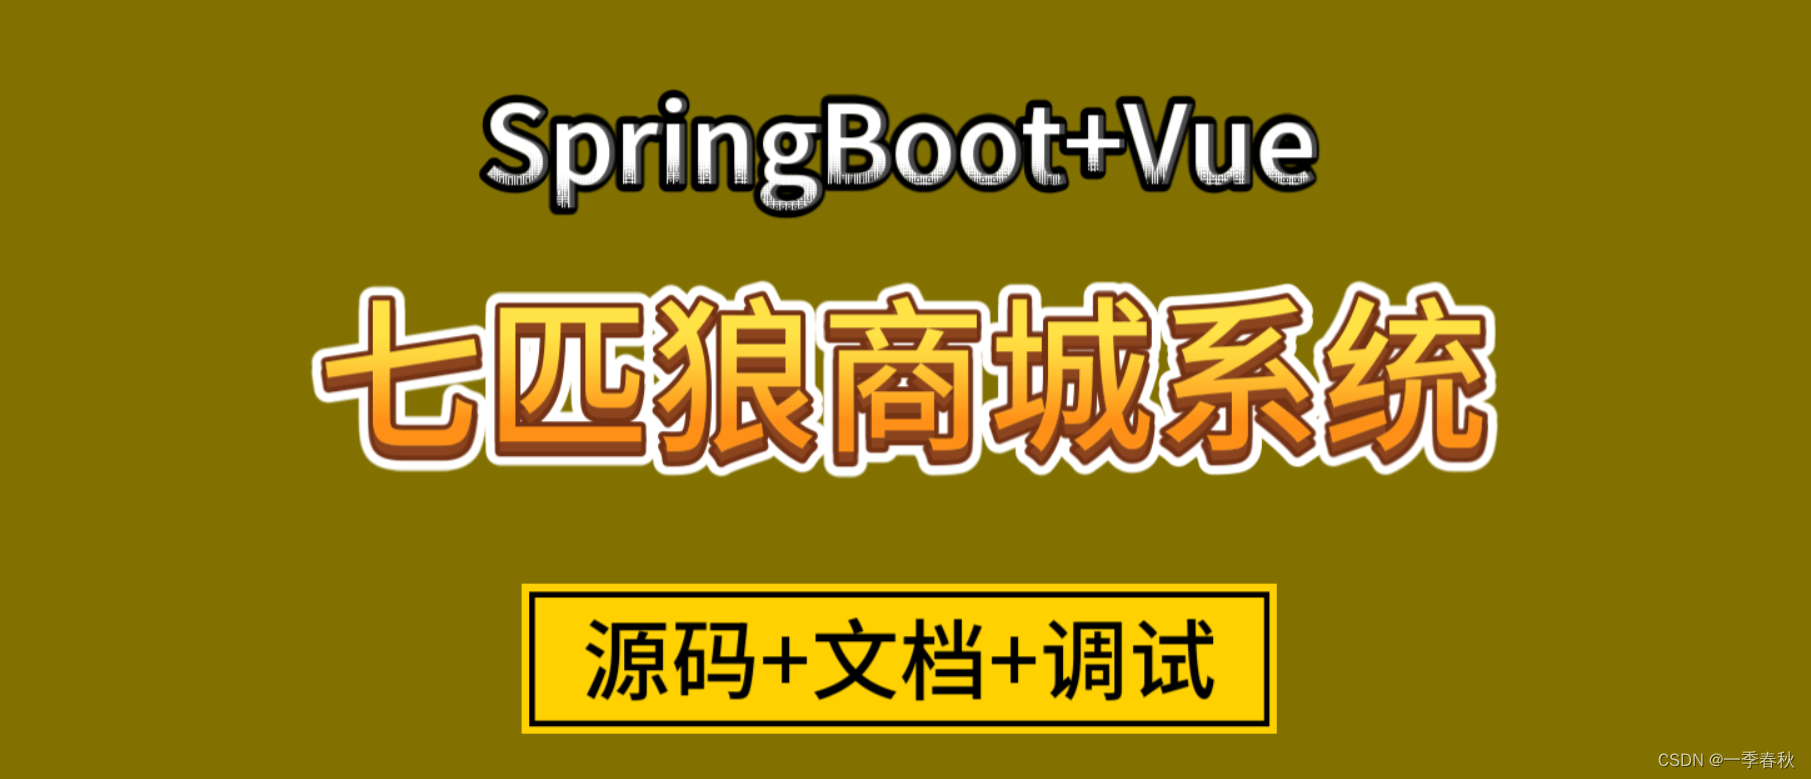 <span style='color:red;'>基于</span><span style='color:red;'>SpringBoot</span>+Vue七匹狼<span style='color:red;'>商城</span>系统<span style='color:red;'>的</span><span style='color:red;'>设计</span><span style='color:red;'>与</span><span style='color:red;'>实现</span>